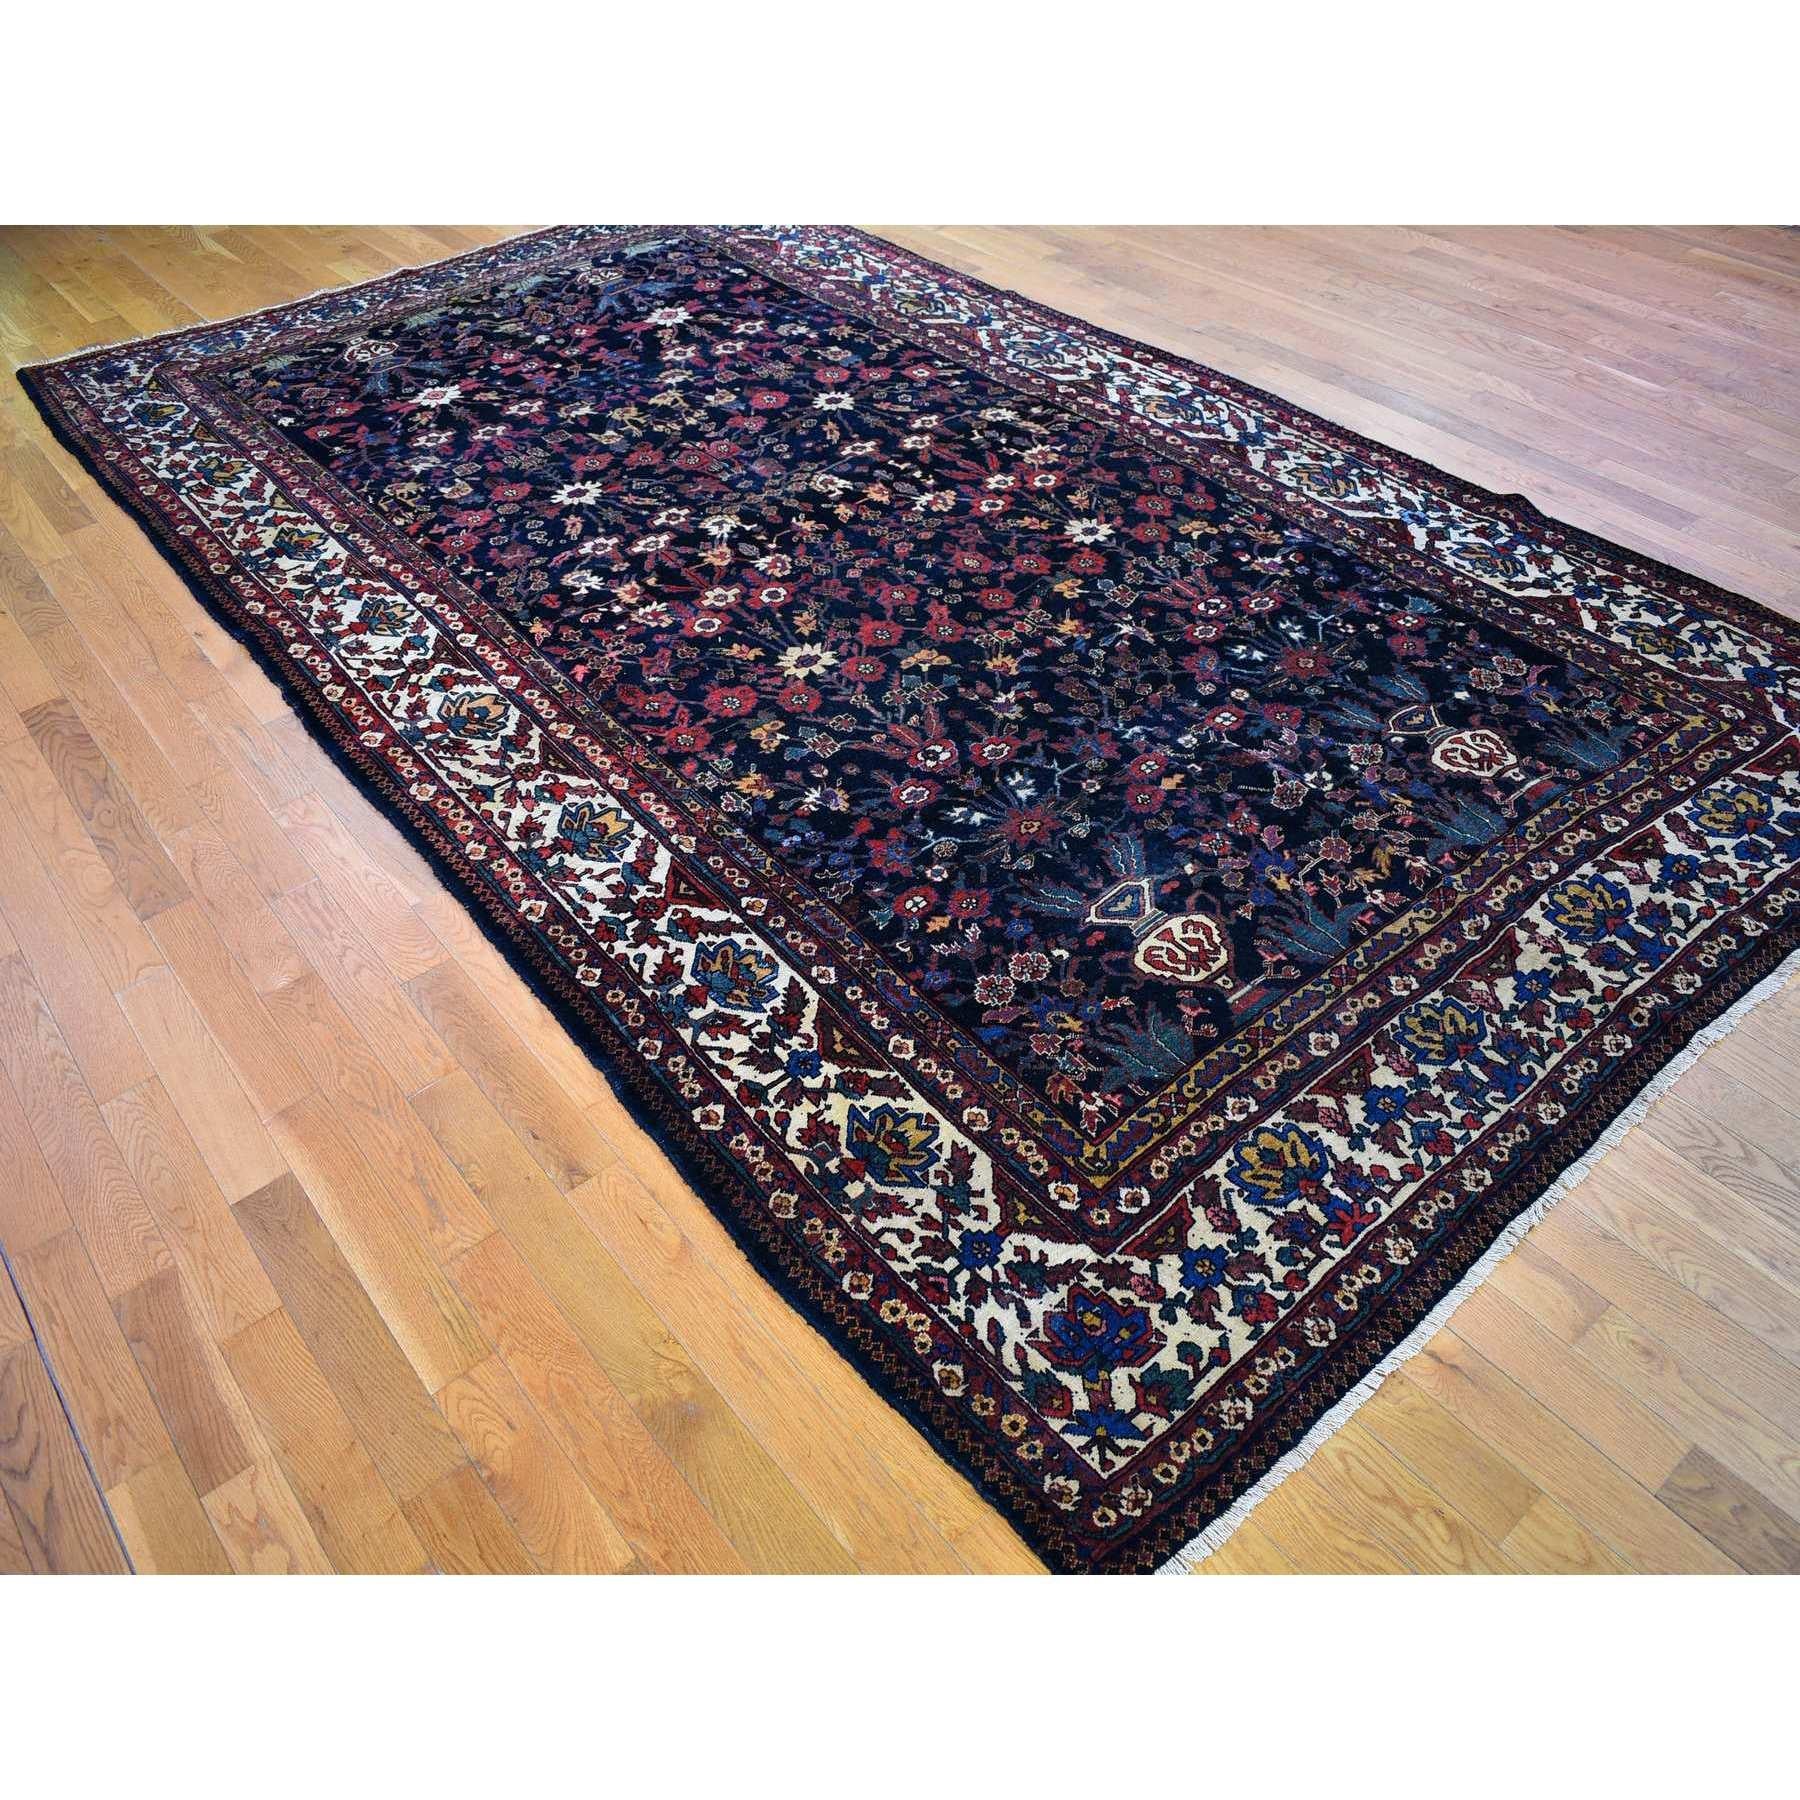 Medieval Antique Persian Bakhtiar Good Condition Longer Shape Worn Down Hand Knotted Rug For Sale